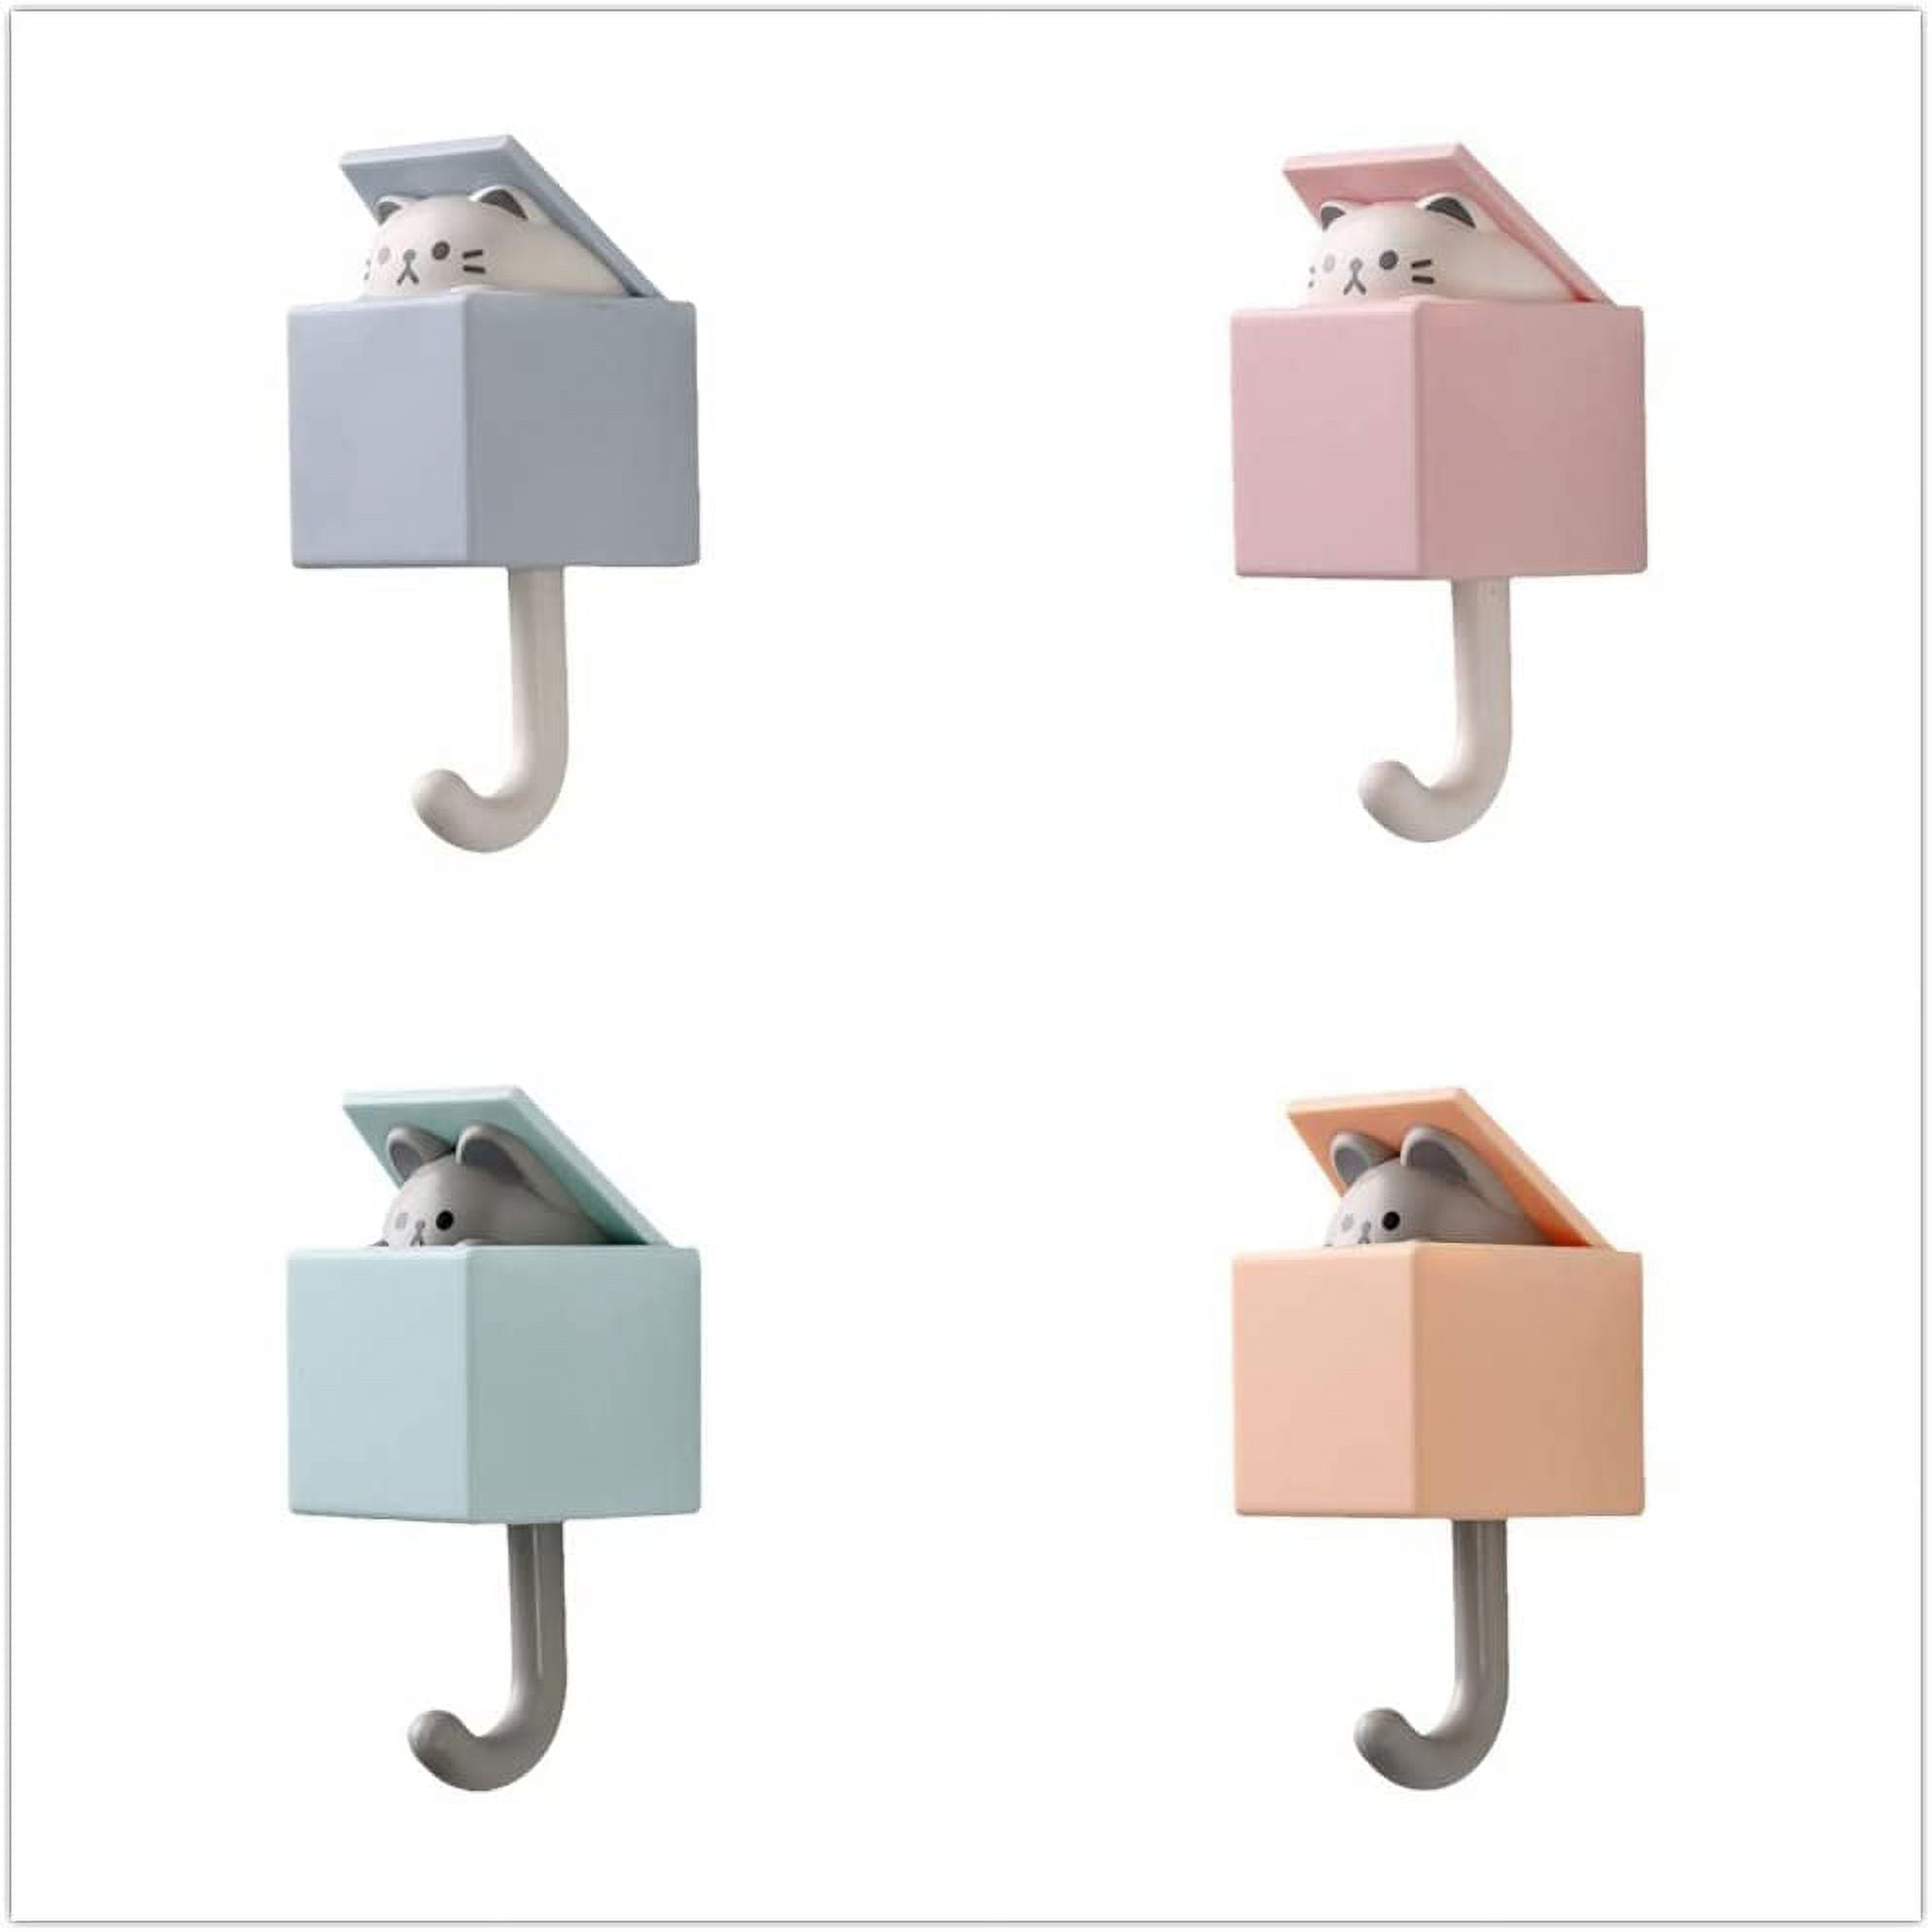 Colorful Umbrella Wall Hooks Key Wall Holder Organizer Decorative Wall  Hanging Hooks Key Hangers for Wall Organizer Home Office Supplier Set of 6